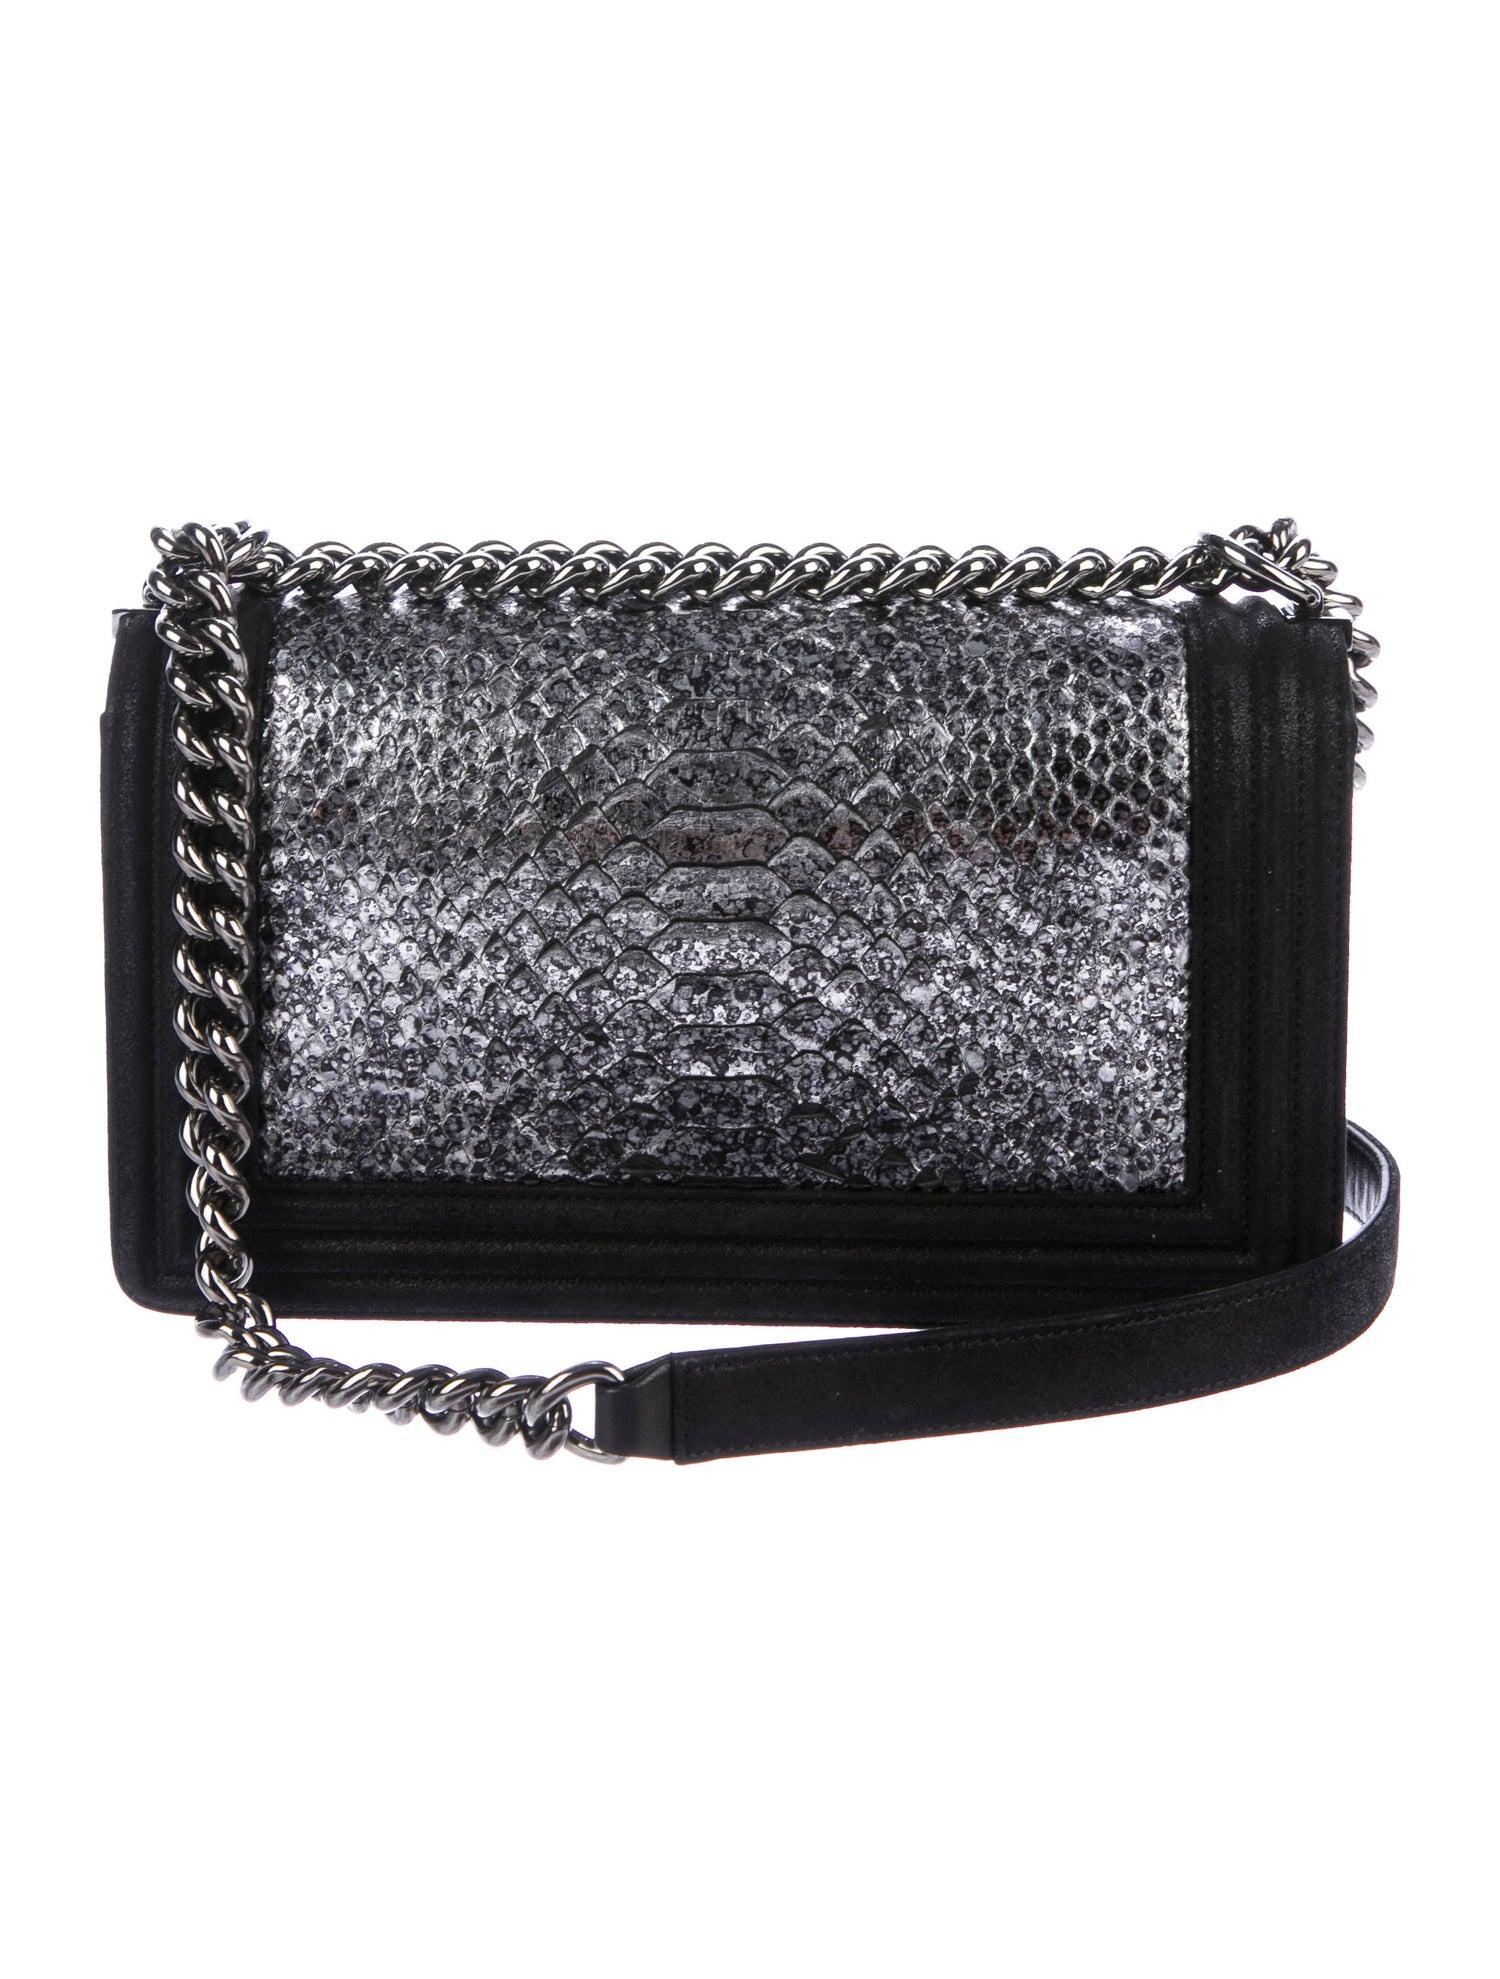 Chanel Black Leather Silver  Snakeskin Exotic Boy Small Shoulder Flap Bag

Snakeskin
Leather
Silver-tone hardware
Suede lining
Push-lock closure 
Date code present 
Made in France
Shoulder strap drop 20